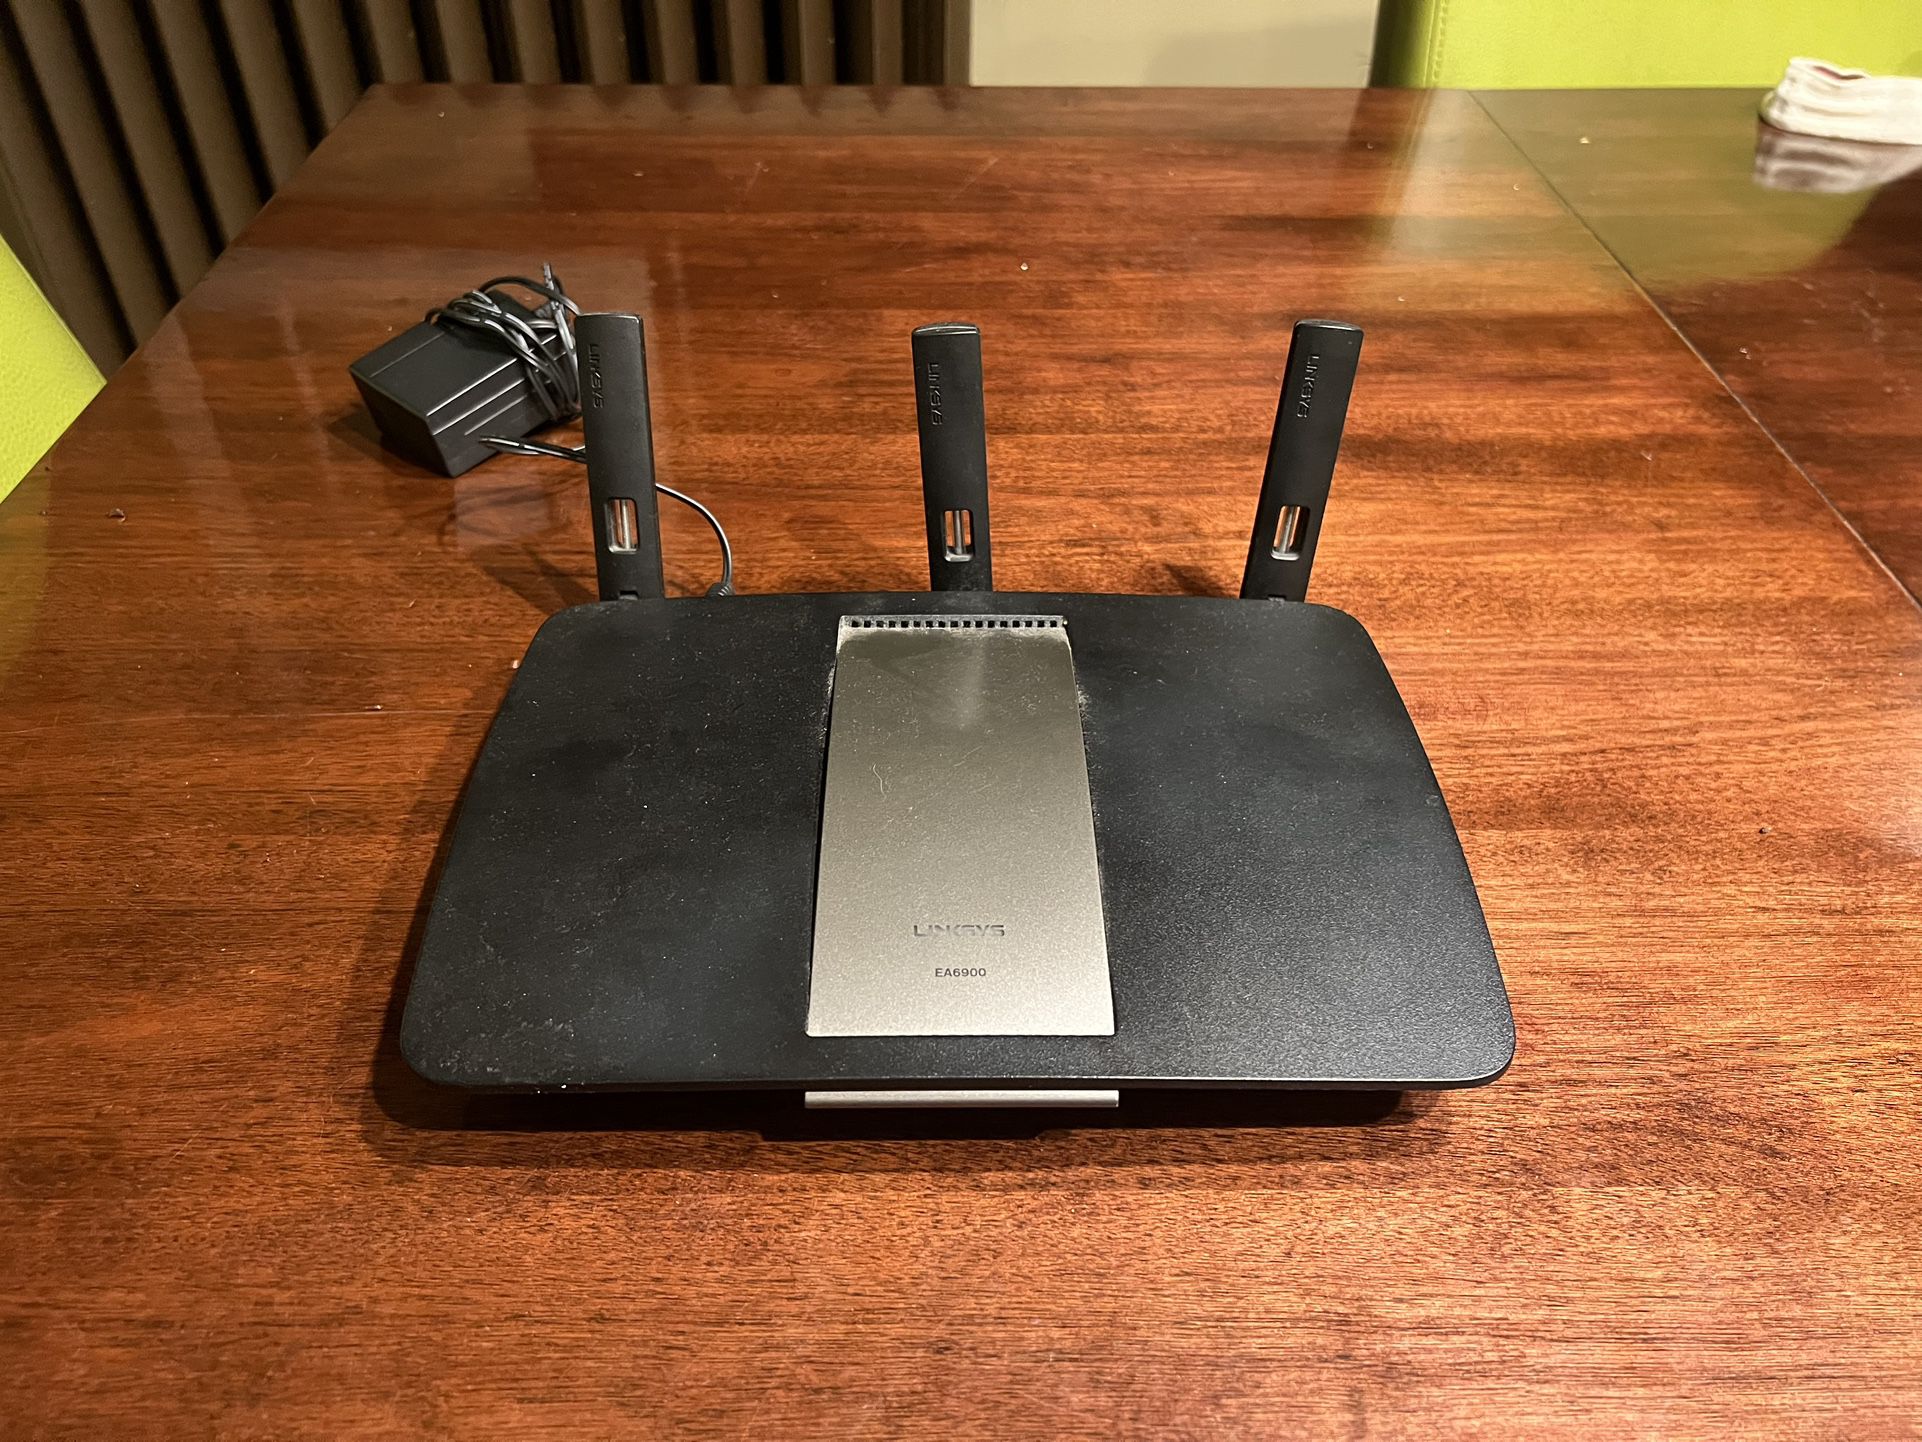 Linksys AC1900 Wi-Fi Wireless Dual-Band+ Router with Gigabit & USB 3.0 Ports